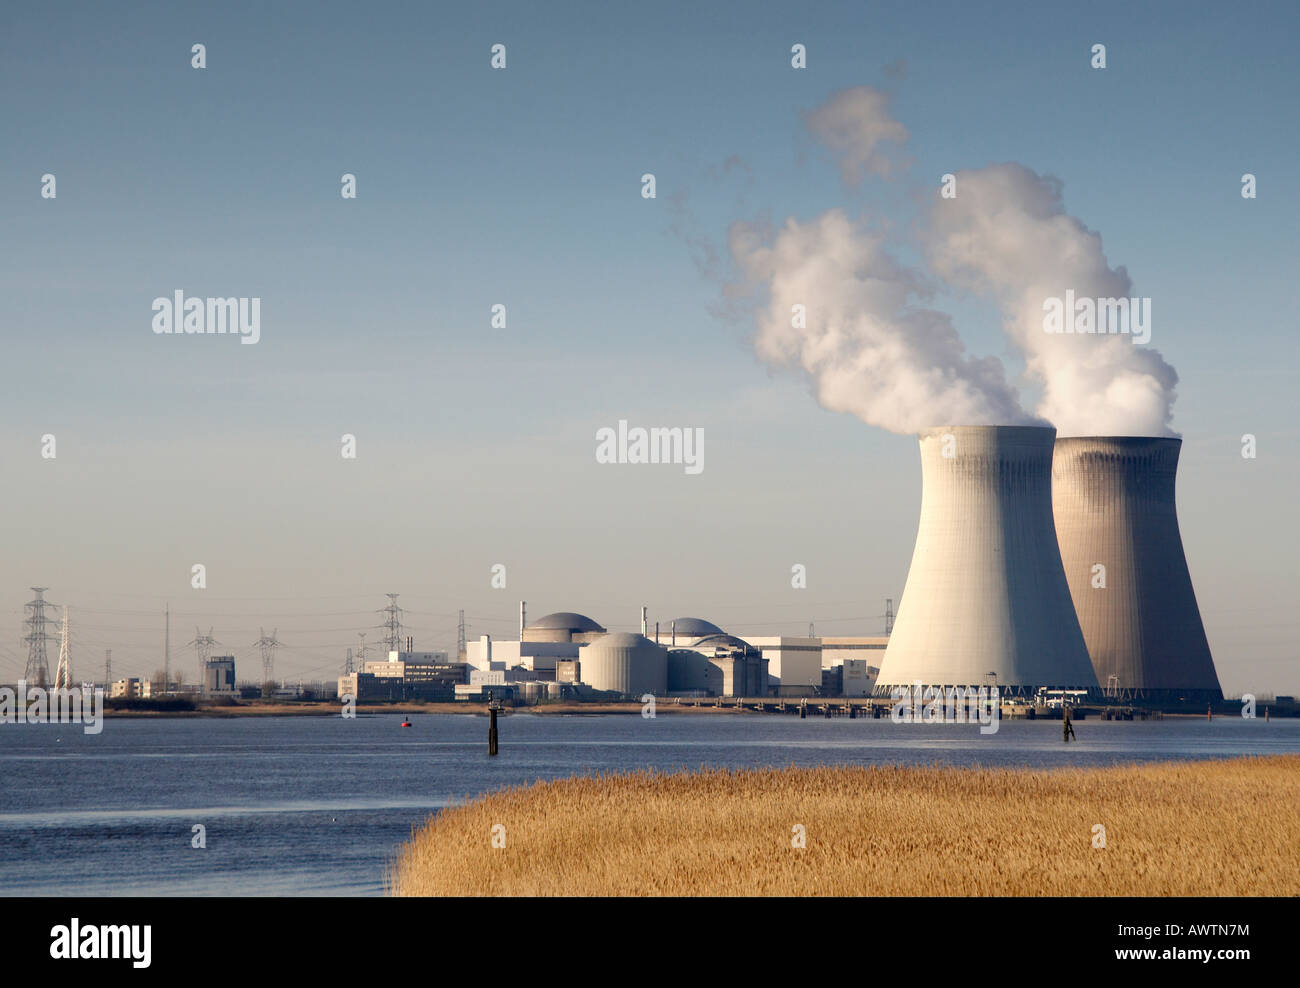 Nuclear power plant Stock Photo